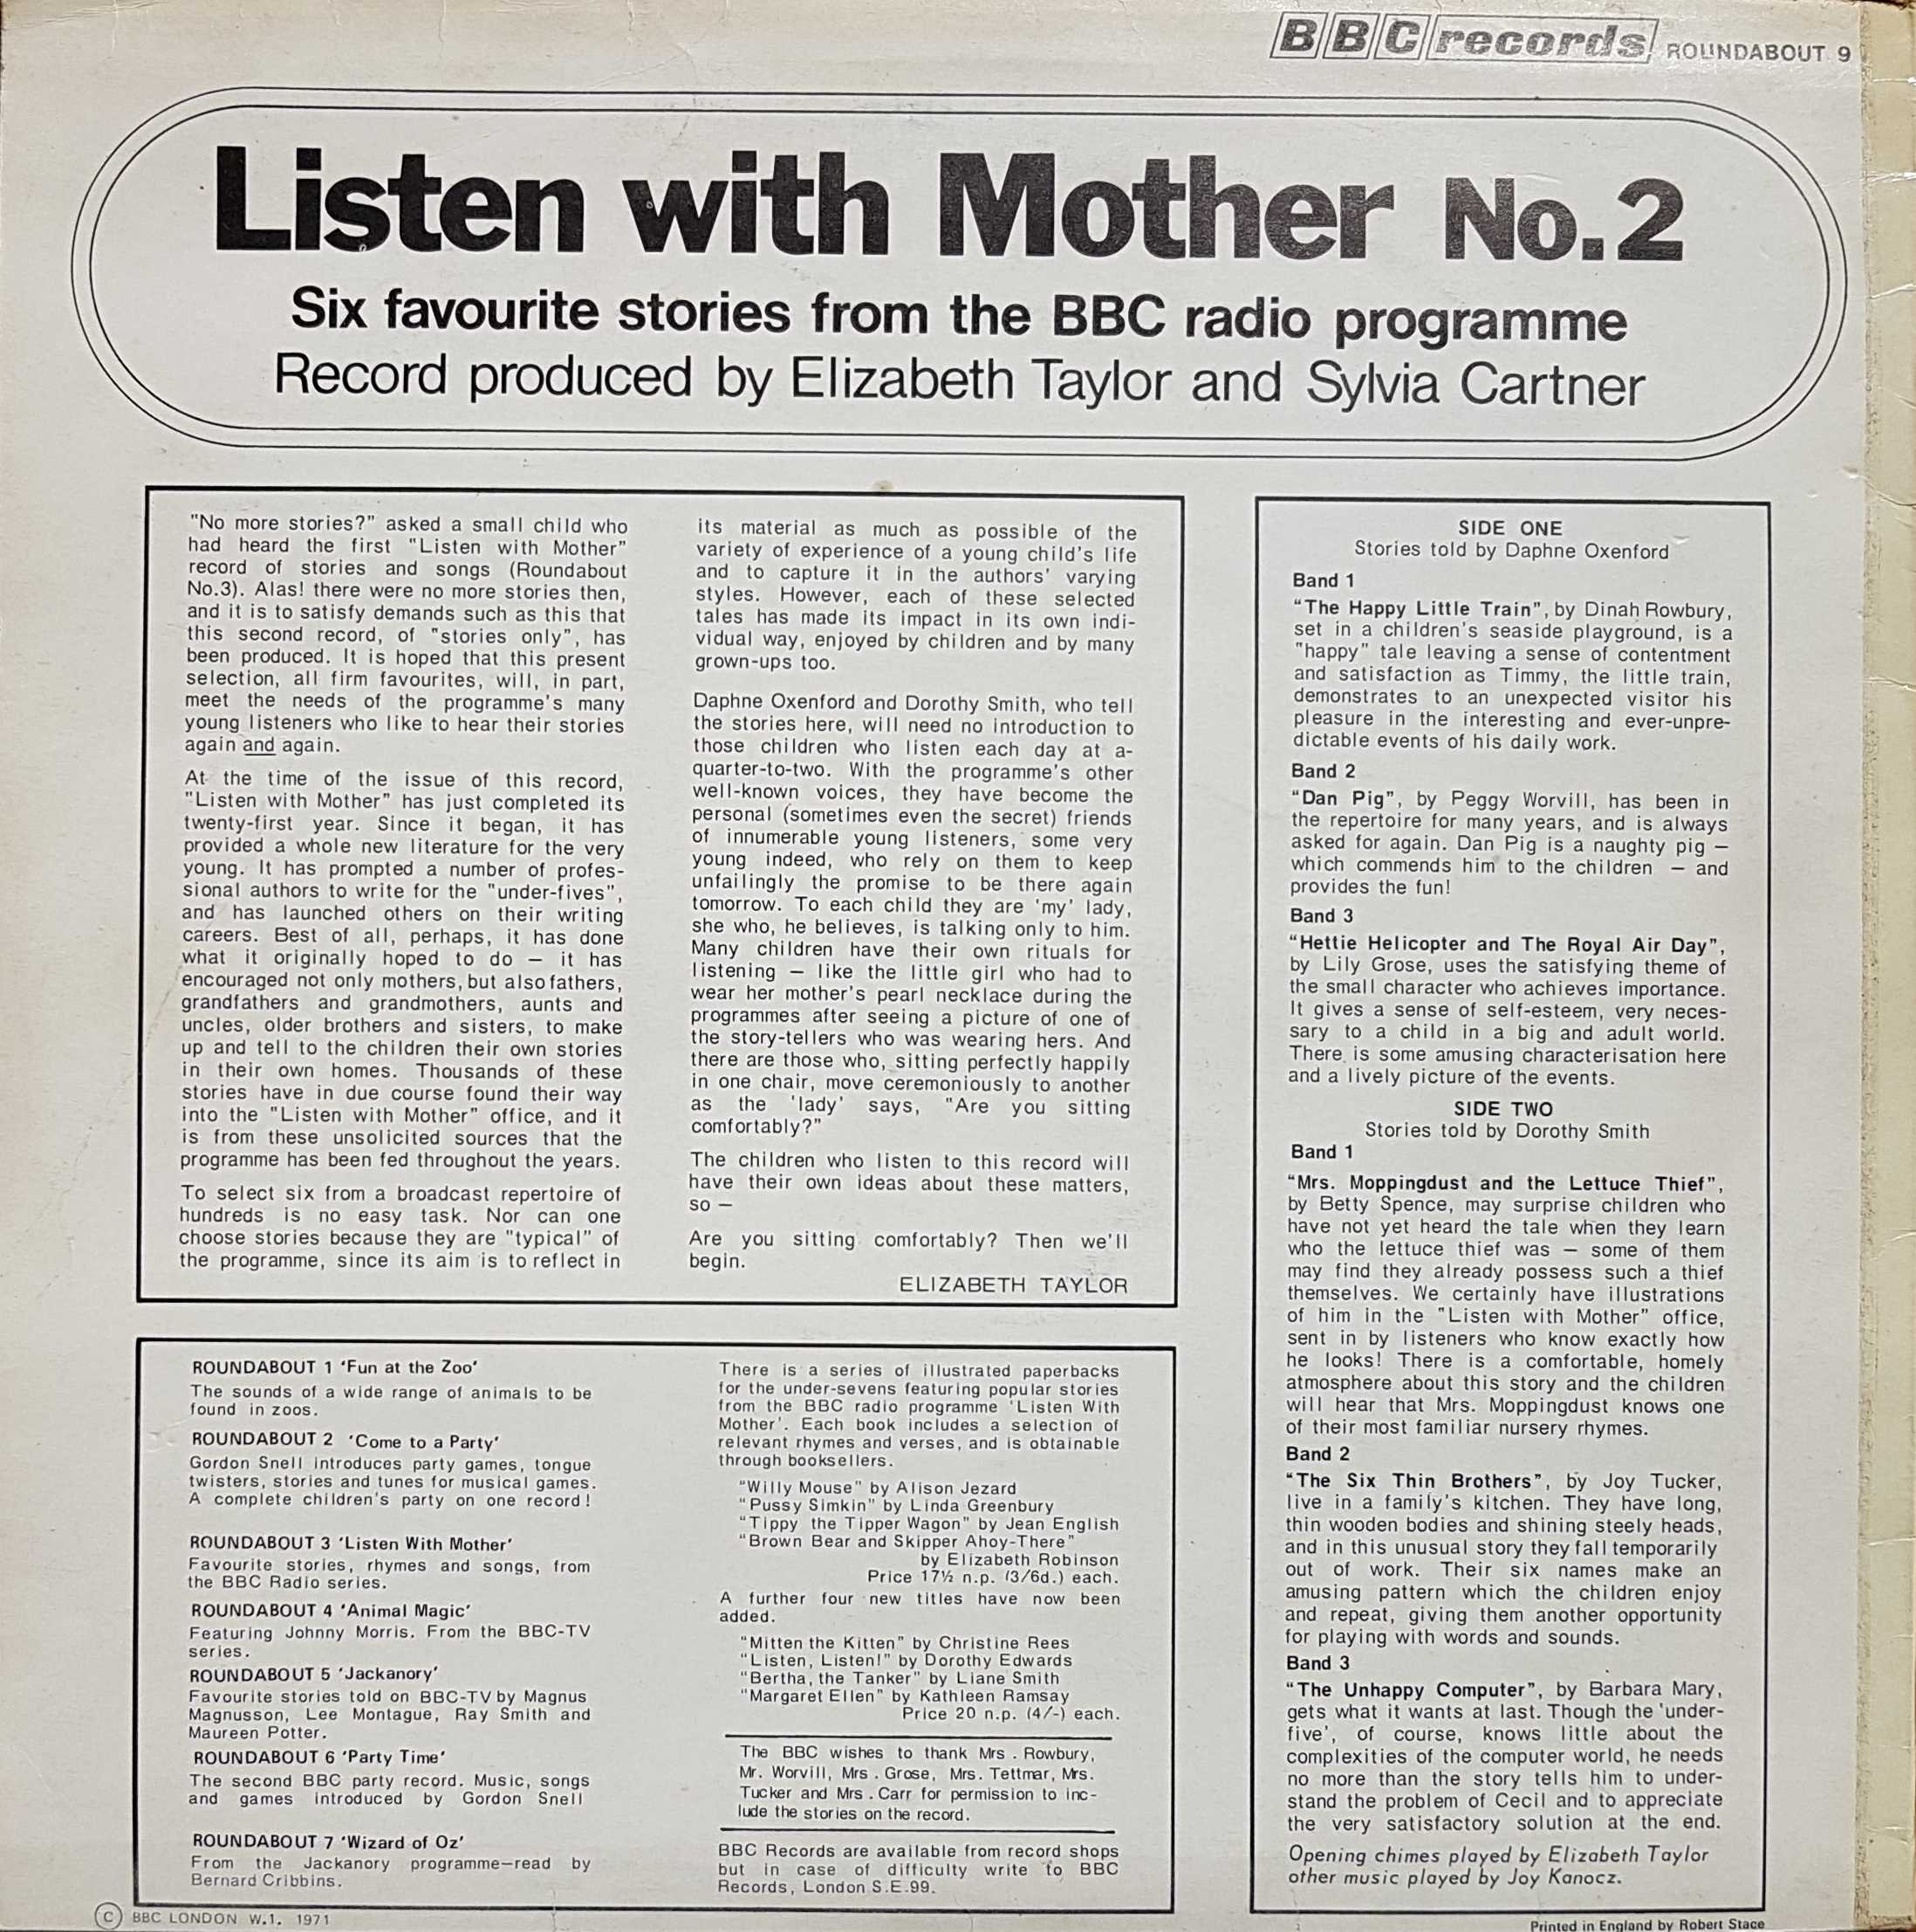 Picture of RBT 9 Listen with mother - Volume 2 by artist Daphne Oxenford / Dorothy Smith from the BBC records and Tapes library